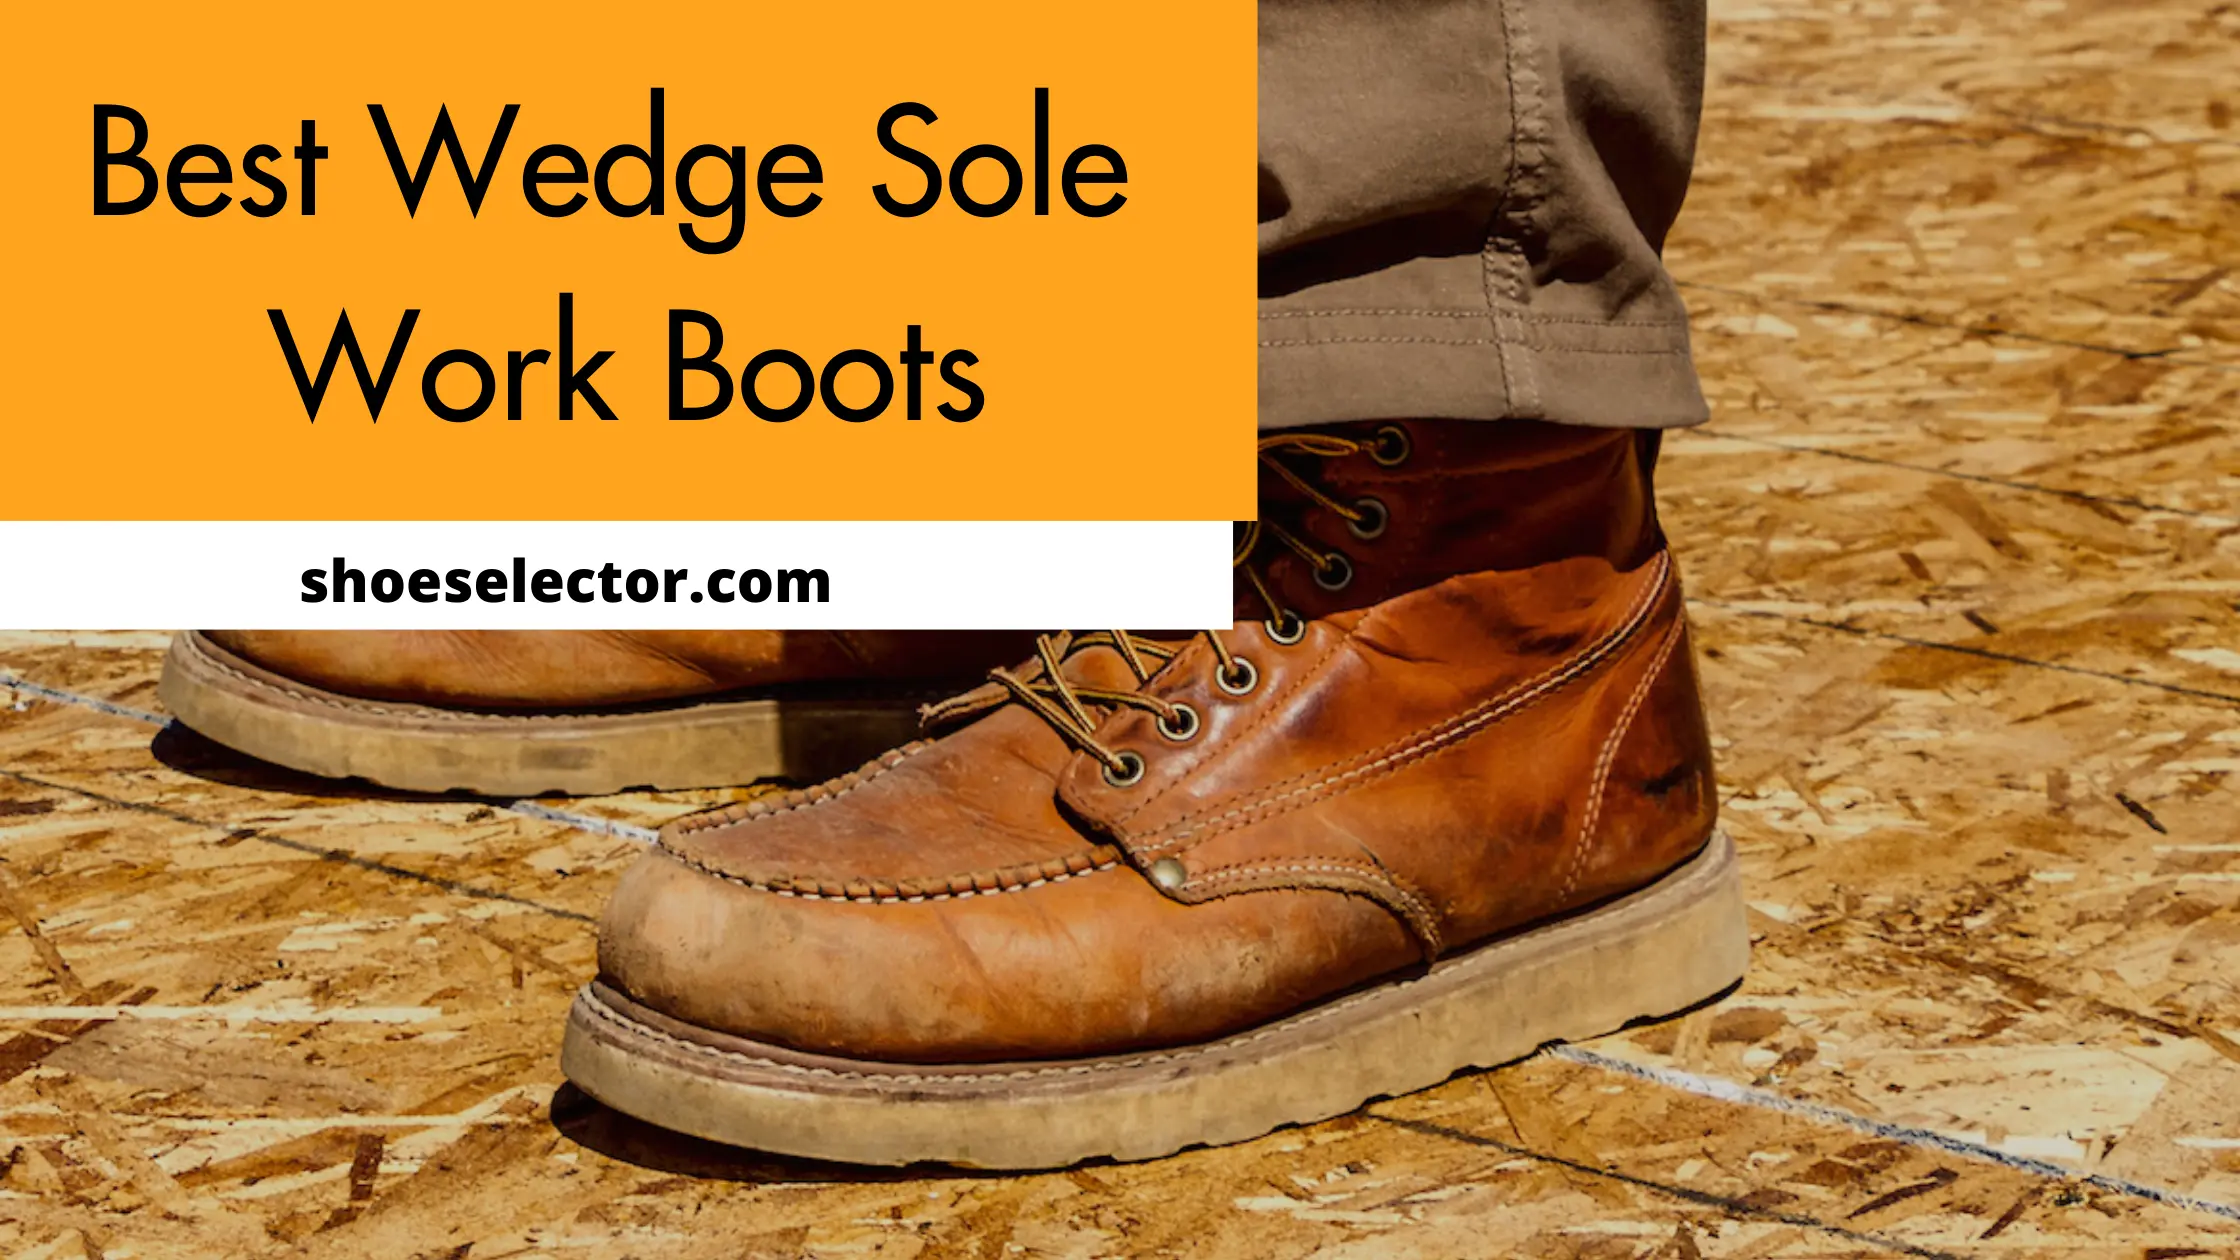 Best Wedge Sole Work Boots - Complete Guide